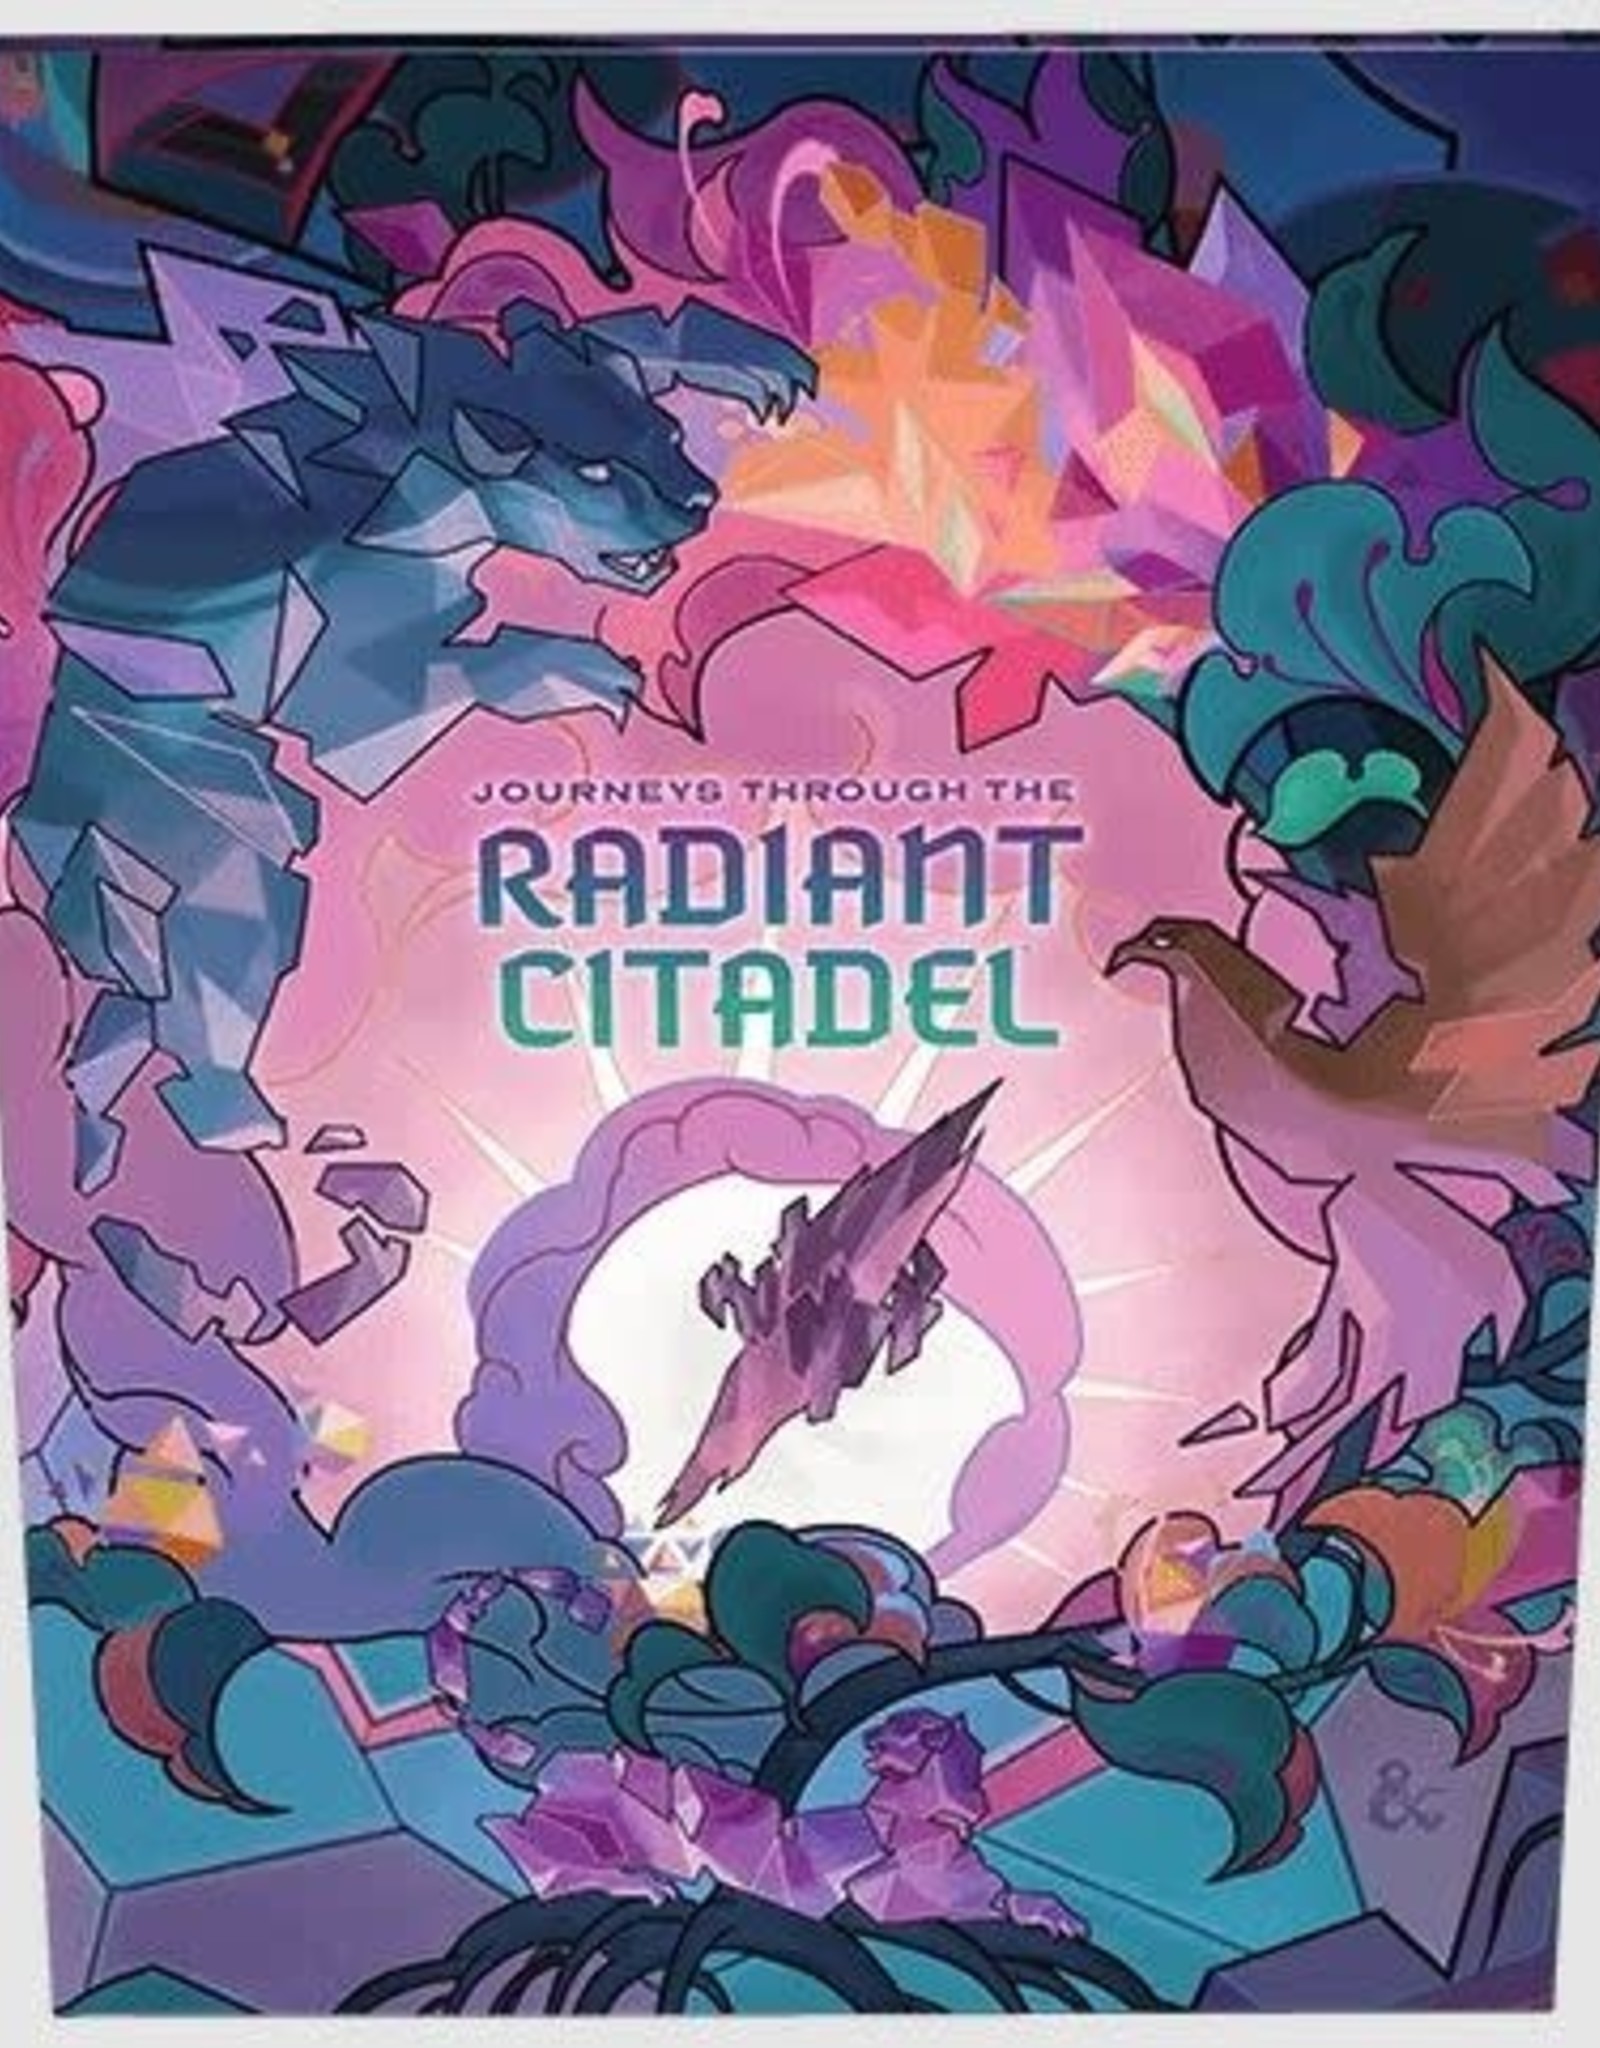 Wizards of the Coast DND Journeys through the Radiant Citadel ALT Cover